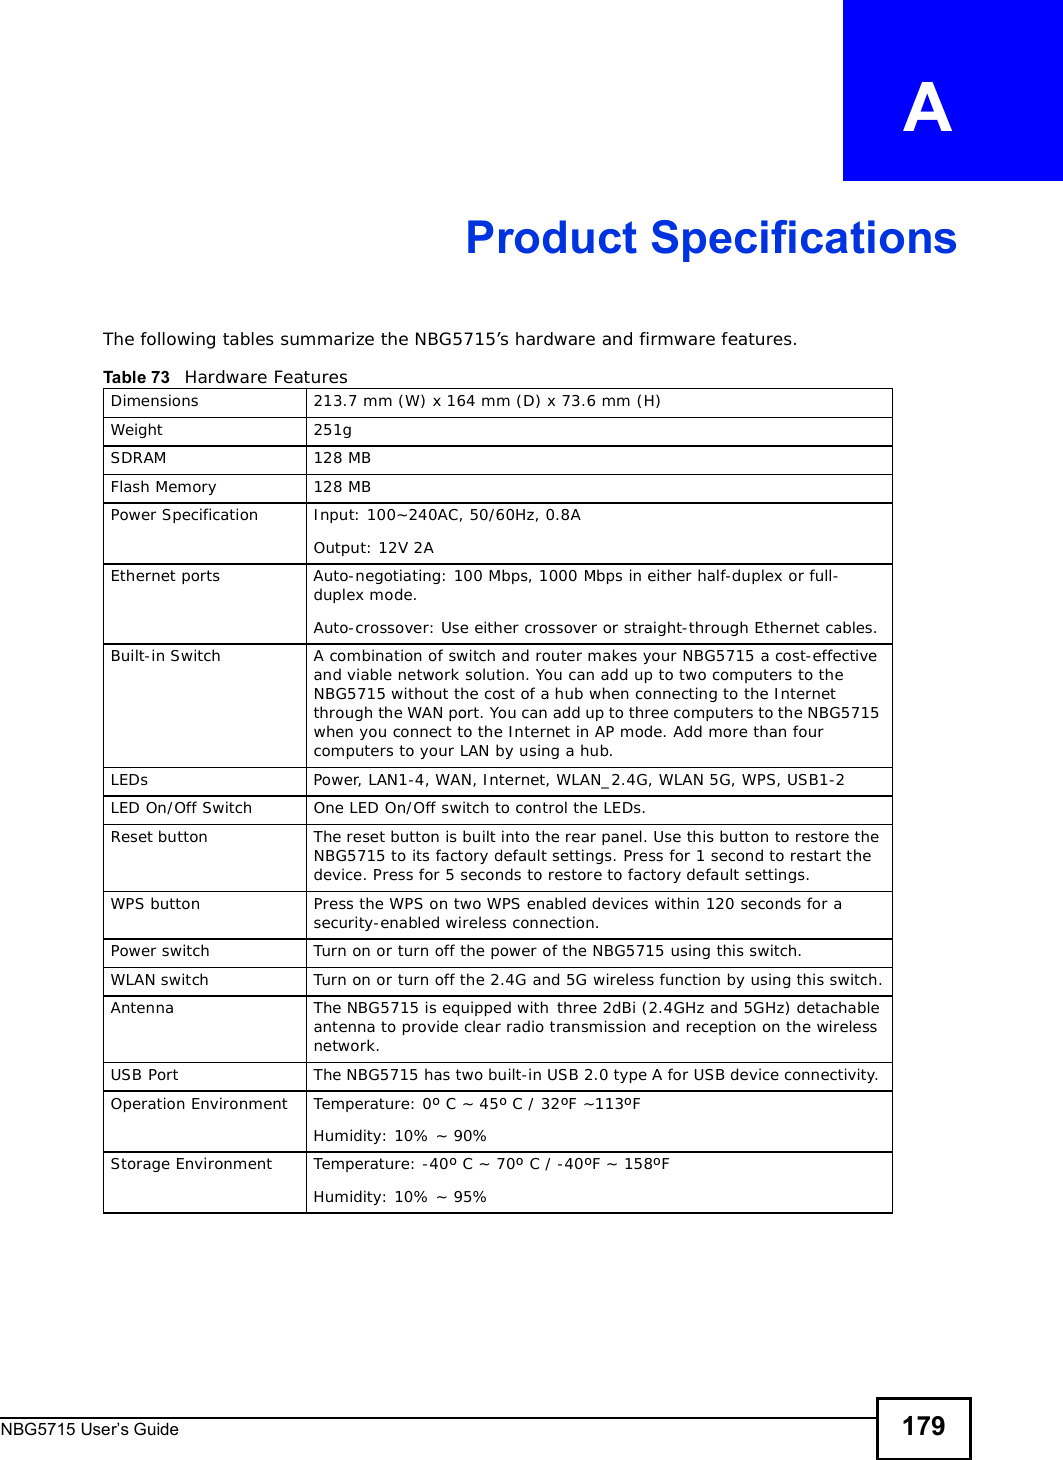 NBG5715 User’s Guide 179APPENDIX   AProduct SpecificationsThe following tables summarize the NBG5715’s hardware and firmware features.Table 73   Hardware FeaturesDimensions 213.7 mm (W) x 164 mm (D) x 73.6 mm (H)Weight 251gSDRAM 128 MBFlash Memory 128 MBPower Specification Input: 100~240AC, 50/60Hz, 0.8AOutput: 12V 2AEthernet portsAuto-negotiating: 100 Mbps, 1000 Mbps in either half-duplex or full-duplex mode.Auto-crossover: Use either crossover or straight-through Ethernet cables.Built-in Switch A combination of switch and router makes your NBG5715 a cost-effective and viable network solution. You can add up to two computers to the NBG5715 without the cost of a hub when connecting to the Internet through the WAN port. You can add up to three computers to the NBG5715 when you connect to the Internet in AP mode. Add more than four computers to your LAN by using a hub.LEDsPower, LAN1-4, WAN, Internet, WLAN_2.4G, WLAN 5G, WPS, USB1-2LED On/Off Switch One LED On/Off switch to control the LEDs.Reset button The reset button is built into the rear panel. Use this button to restore the NBG5715 to its factory default settings. Press for 1 second to restart the device. Press for 5 seconds to restore to factory default settings.WPS button Press the WPS on two WPS enabled devices within 120 seconds for a security-enabled wireless connection.Power switch Turn on or turn off the power of the NBG5715 using this switch.WLAN switch Turn on or turn off the 2.4G and 5G wireless function by using this switch.Antenna The NBG5715 is equipped withthree 2dBi (2.4GHz and 5GHz) detachable antenna to provide clear radio transmission and reception on the wireless network. USB Port The NBG5715 has two built-in USB 2.0 type A for USB device connectivity. Operation Environment Temperature: 0º C ~ 45º C / 32ºF ~113ºFHumidity: 10% ~ 90% Storage Environment Temperature: -40º C ~ 70º C / -40ºF ~ 158ºFHumidity: 10% ~ 95% 